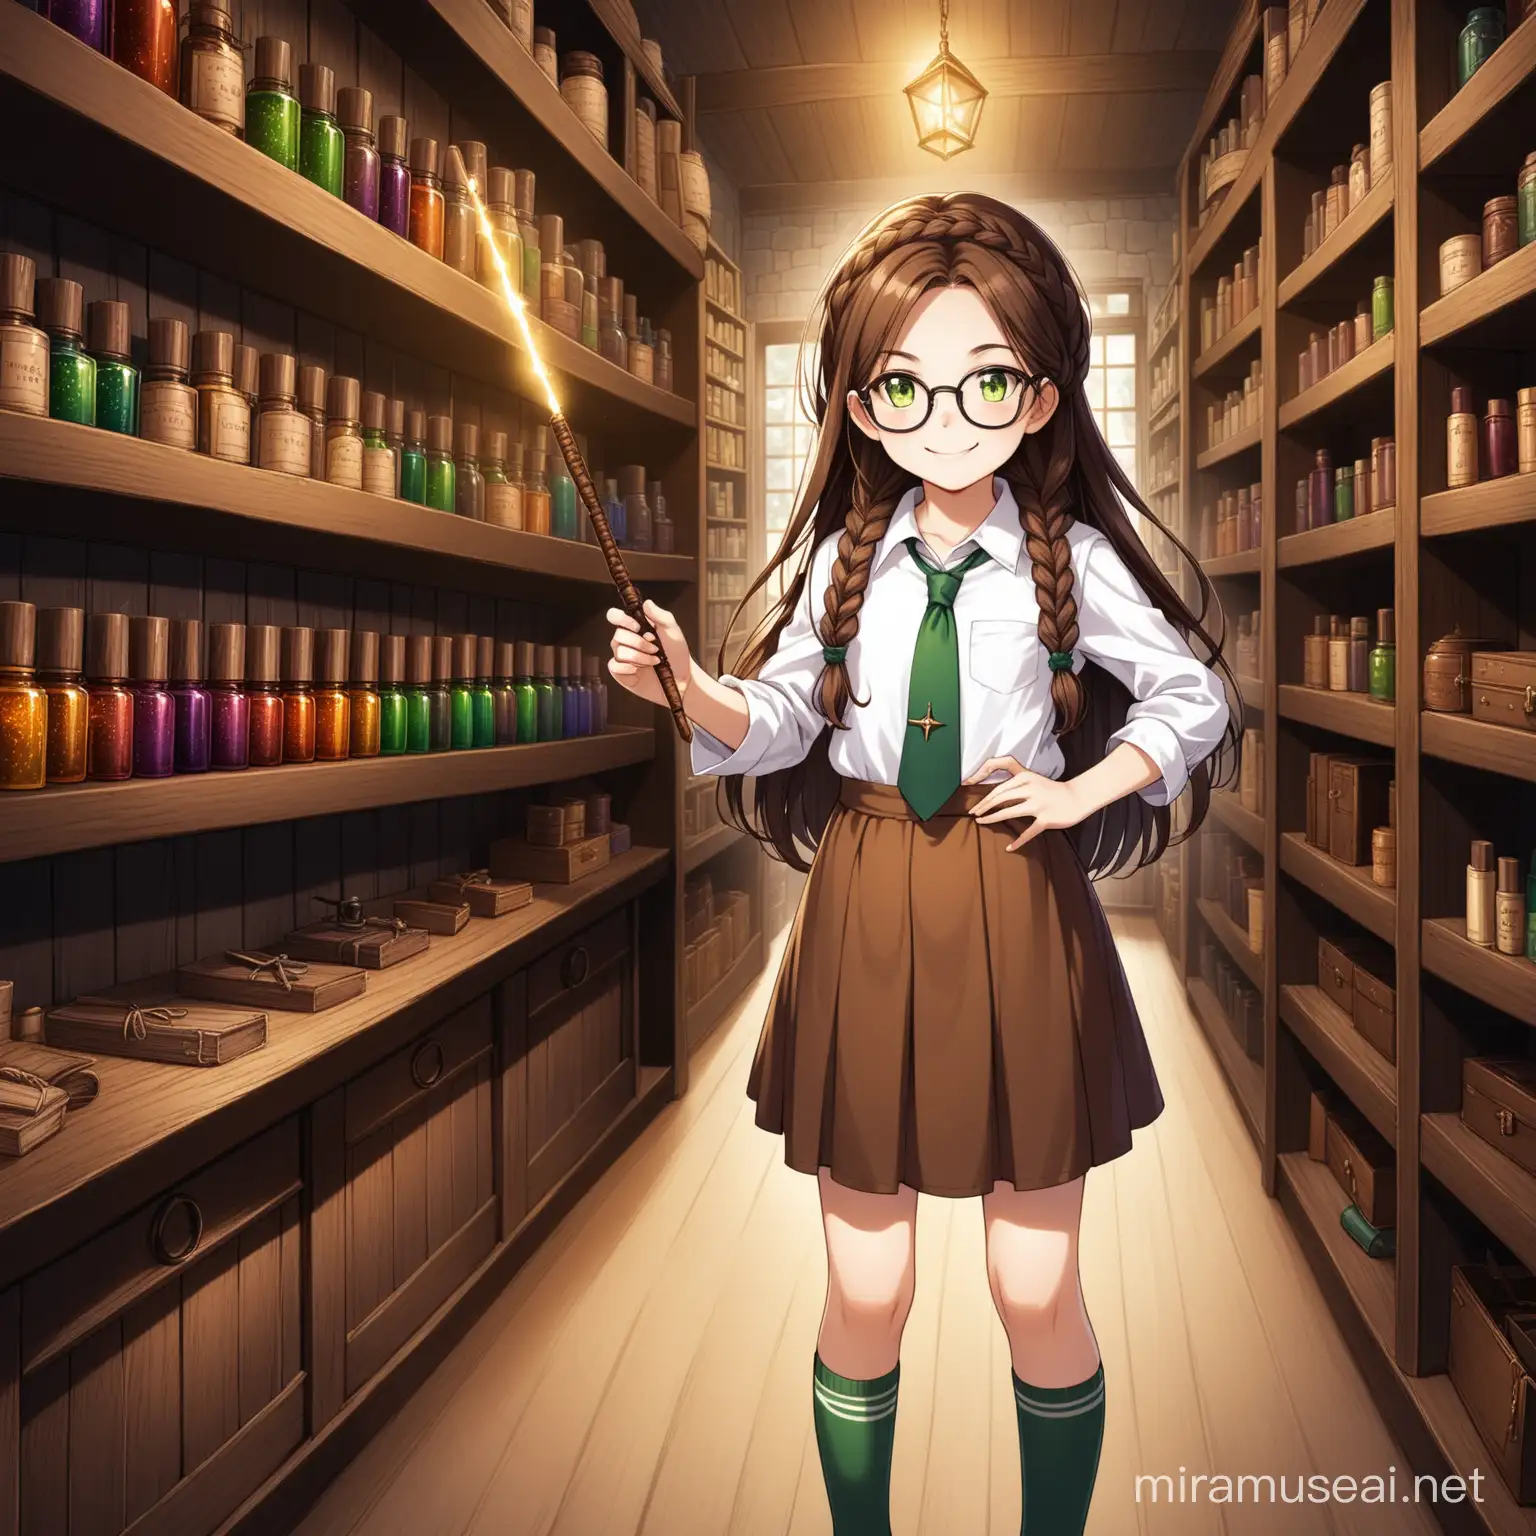 Cheerful 11YearOld Girl Exploring Witchcraft Shop with Wand